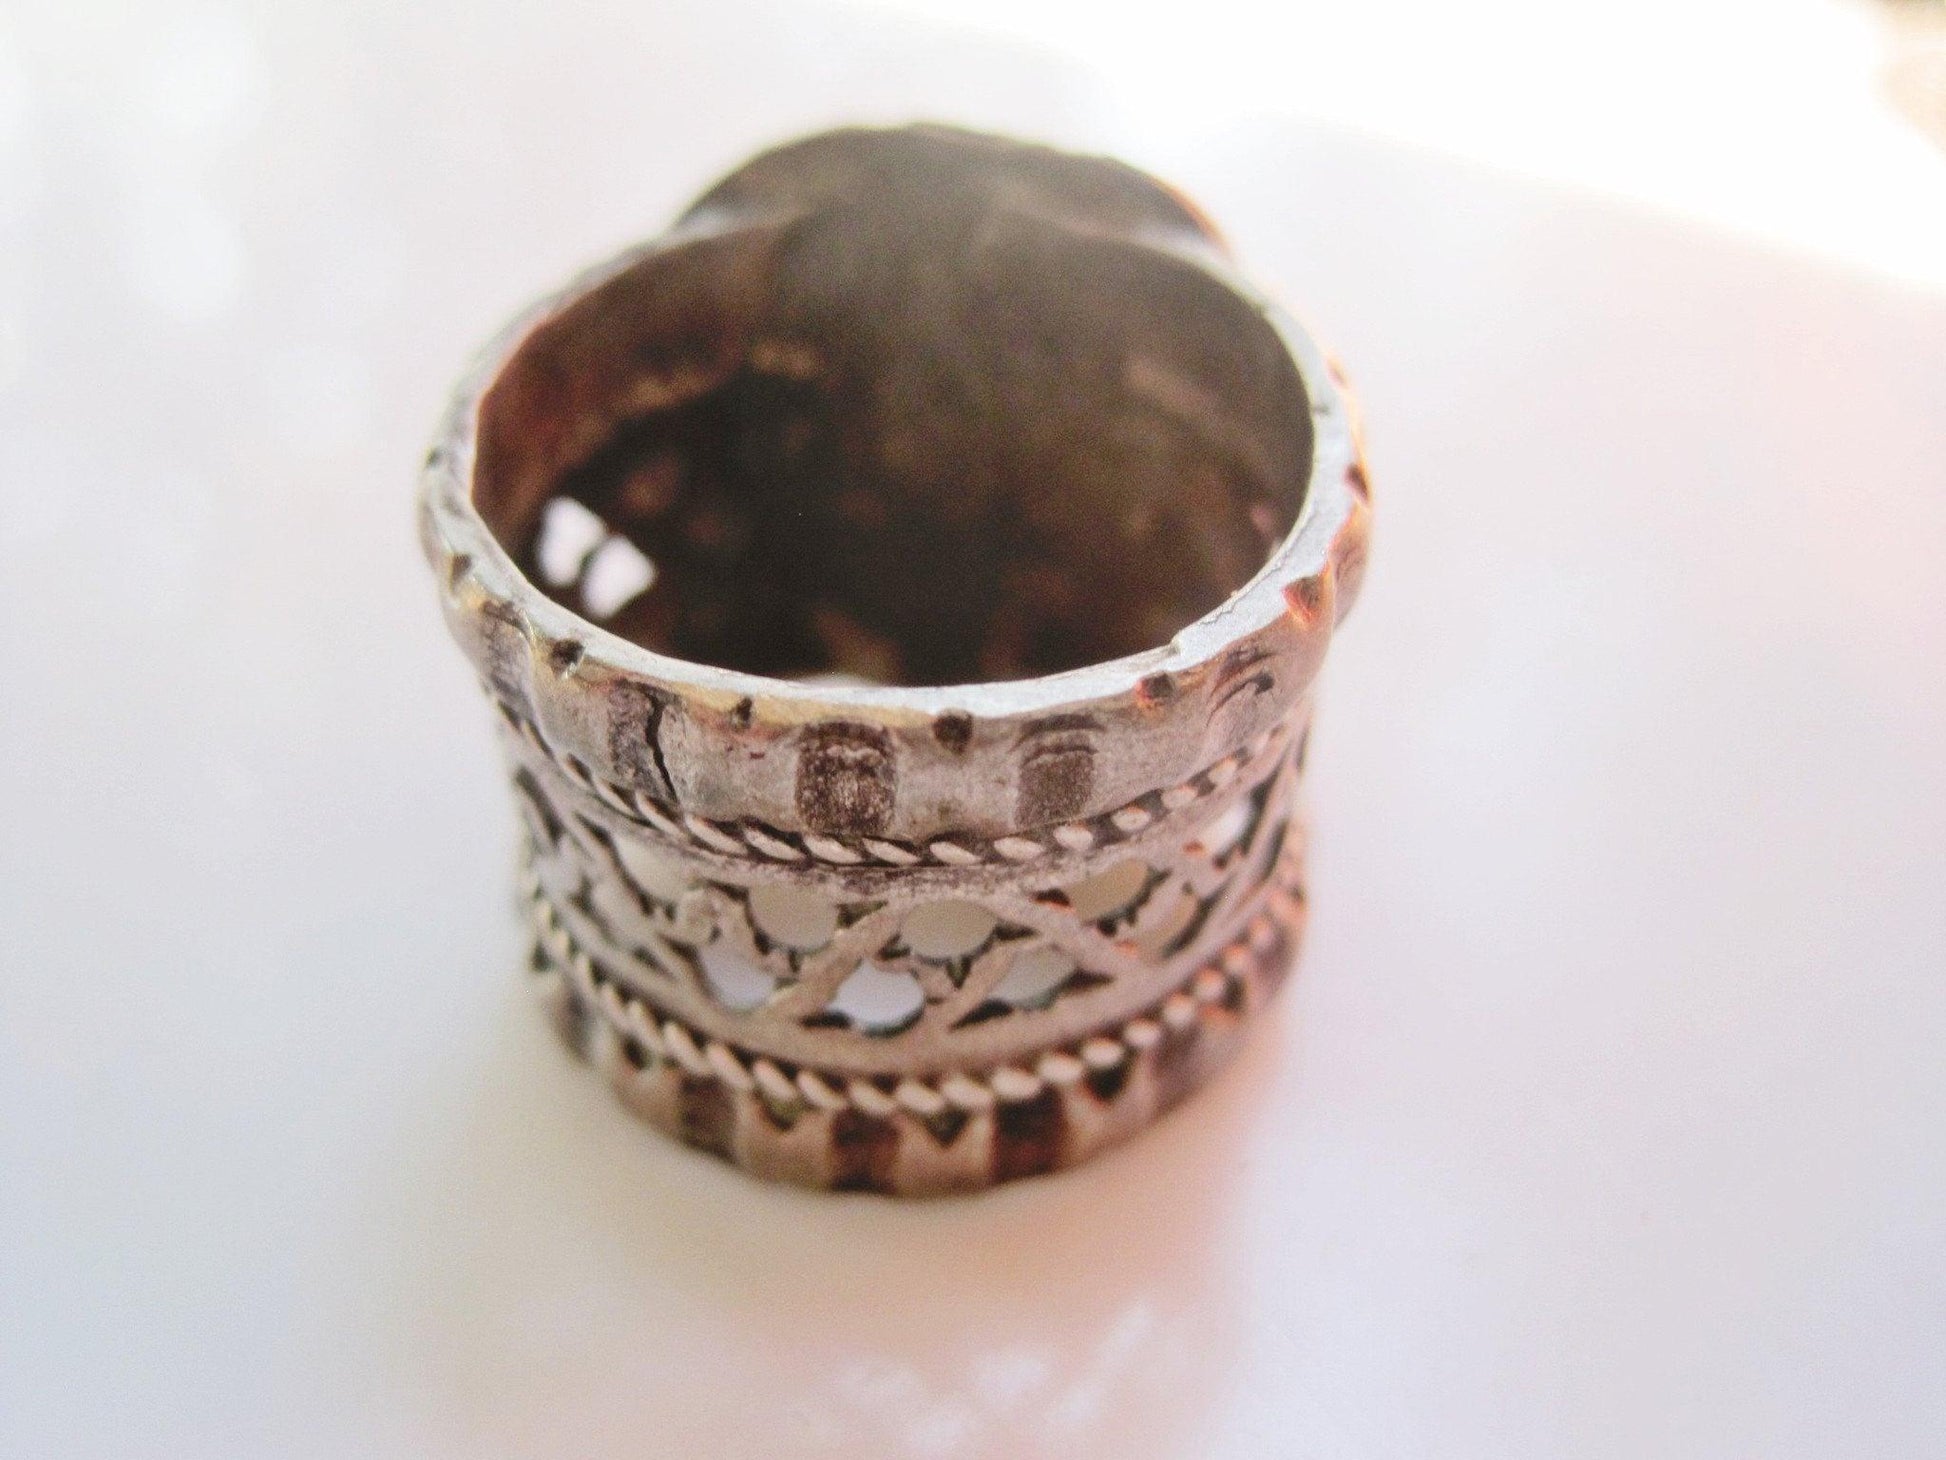 Vintage Silver Tower Ring with Red Glass, Size 9 from the Middle East - Anteeka